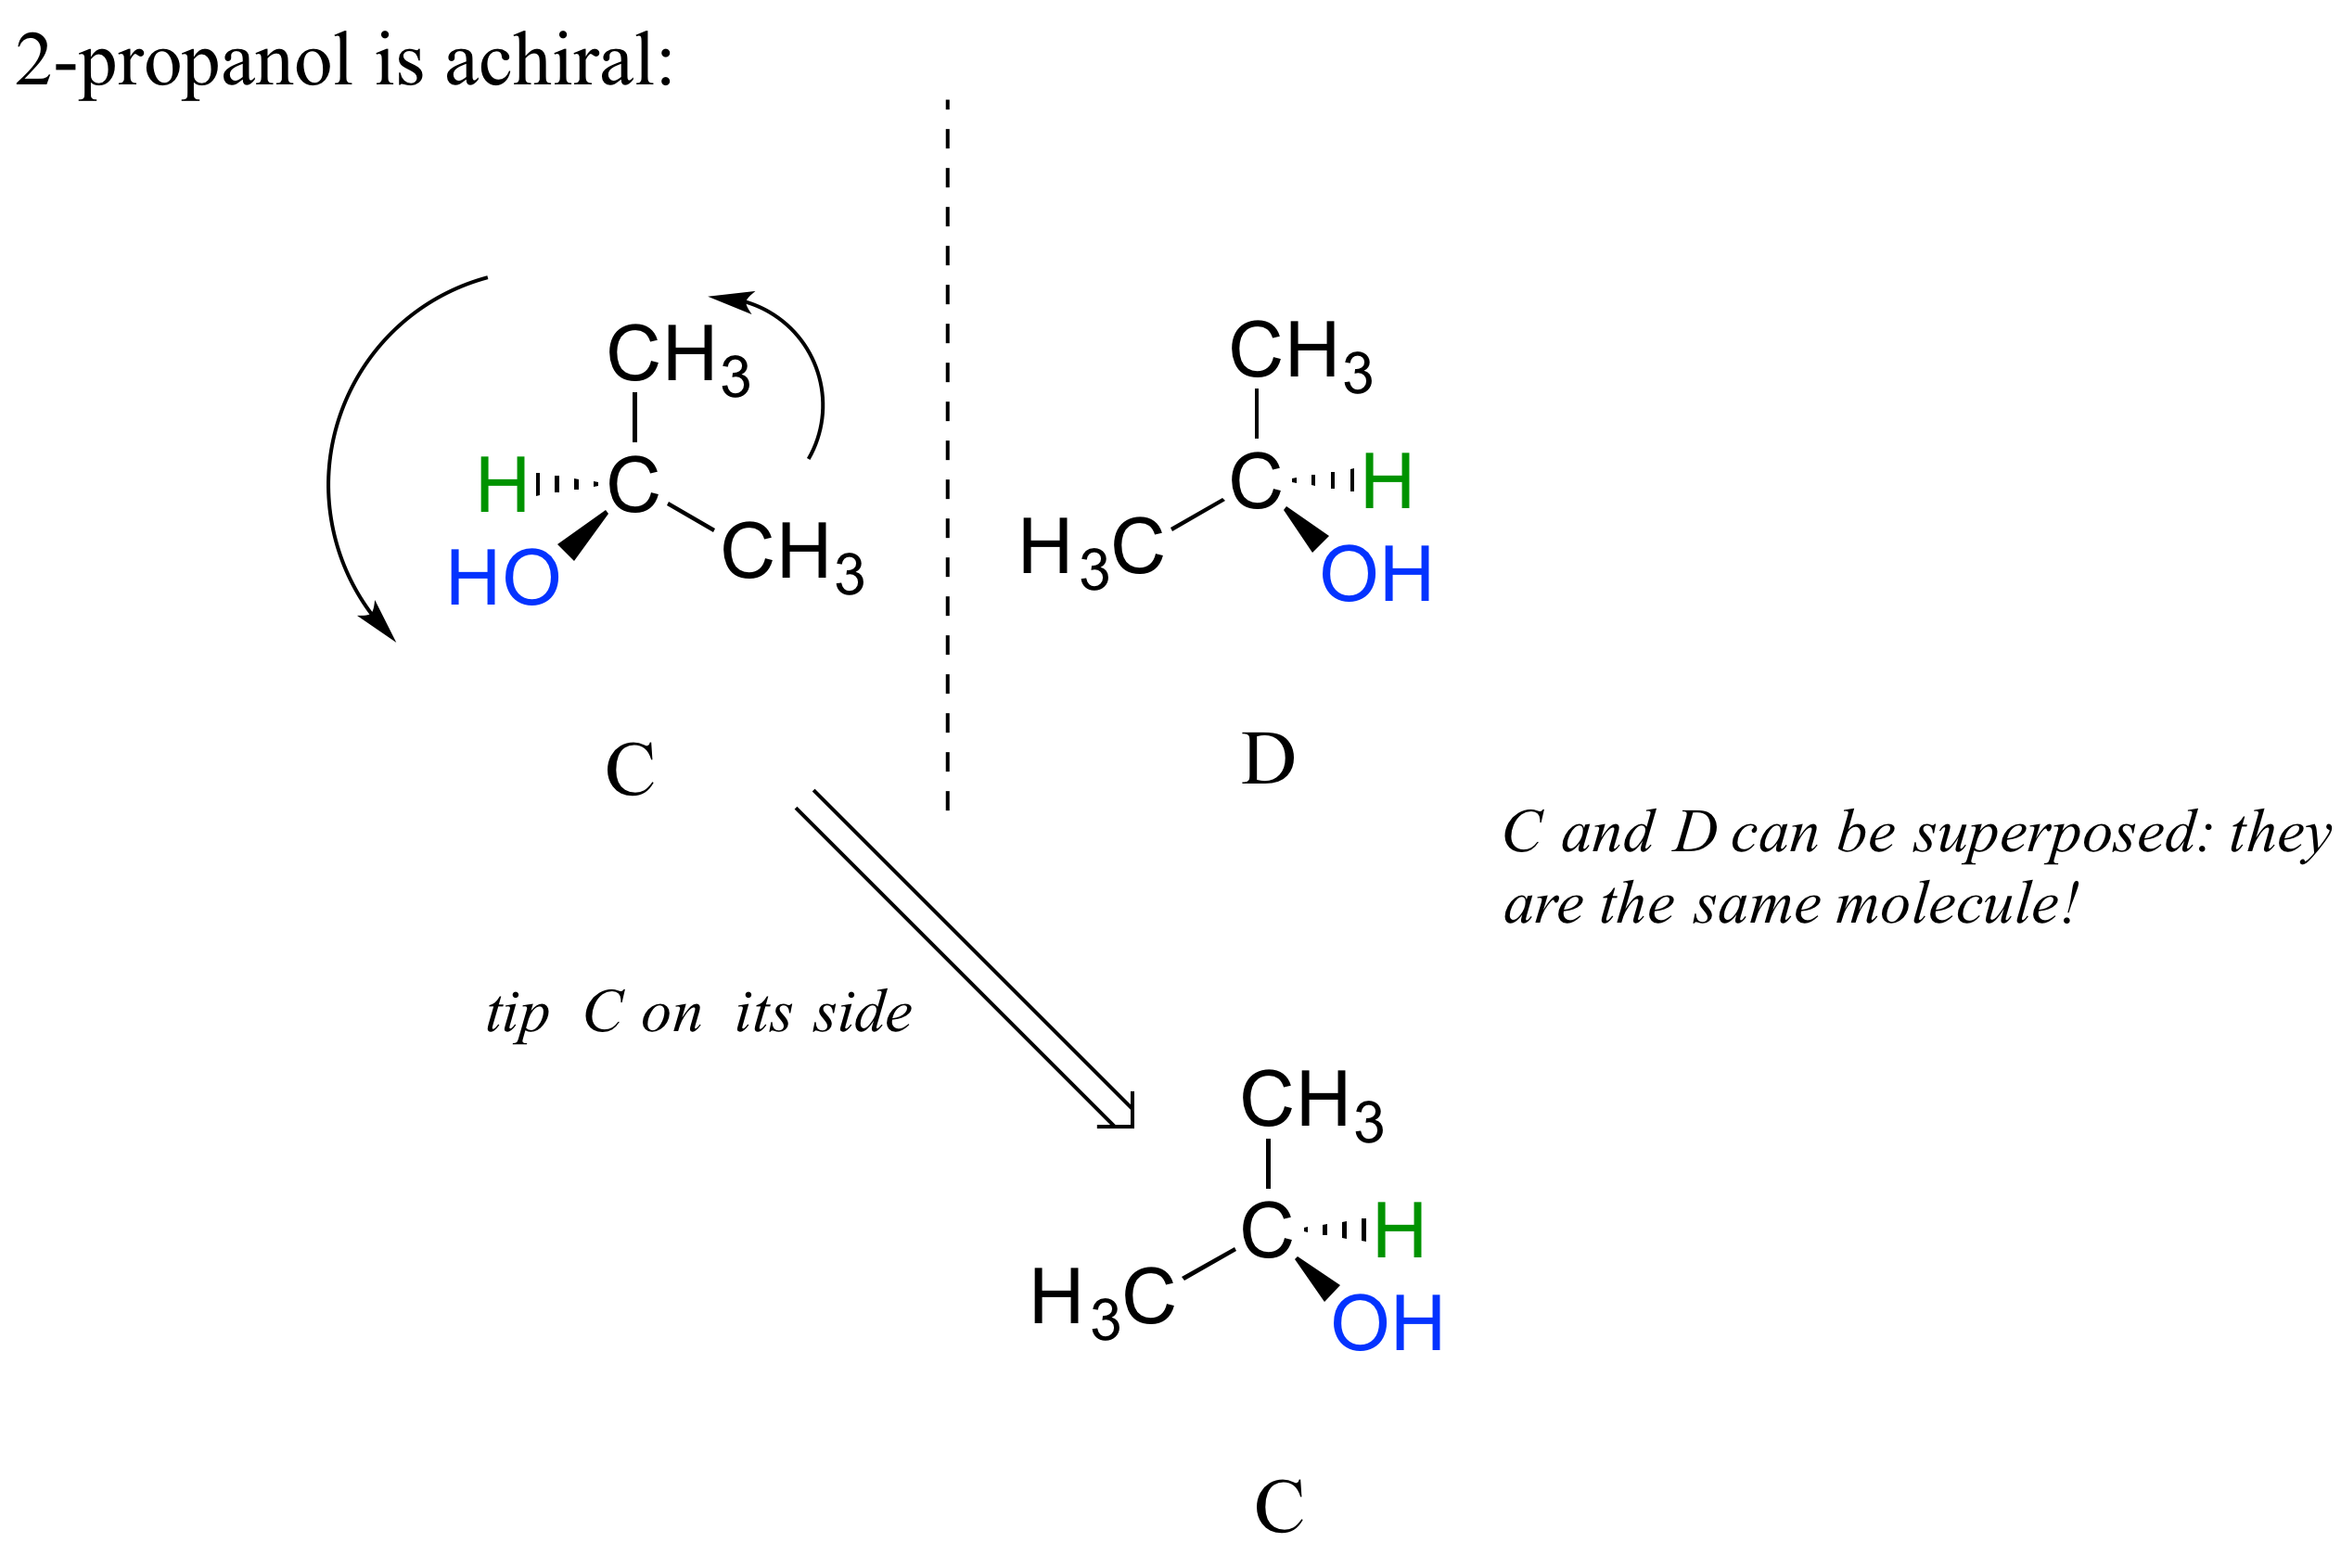 2-propanol is shown with groups oriented around carbon 2 as in structures C and D in an earlier figure. In structure C, at carbon 2 the OH group is attached by a solid wedge and H by a dashed wedge (both to the left). Two CH3 groups are also connected by regular lines (up, and right). The mirror image is structure D, with CH3 groups (above to the left) and OH (right, solid wedge) and H (right, dashed wedge). When C is flipped or turned we find structure C is superimposable on D: they are the same molecule.